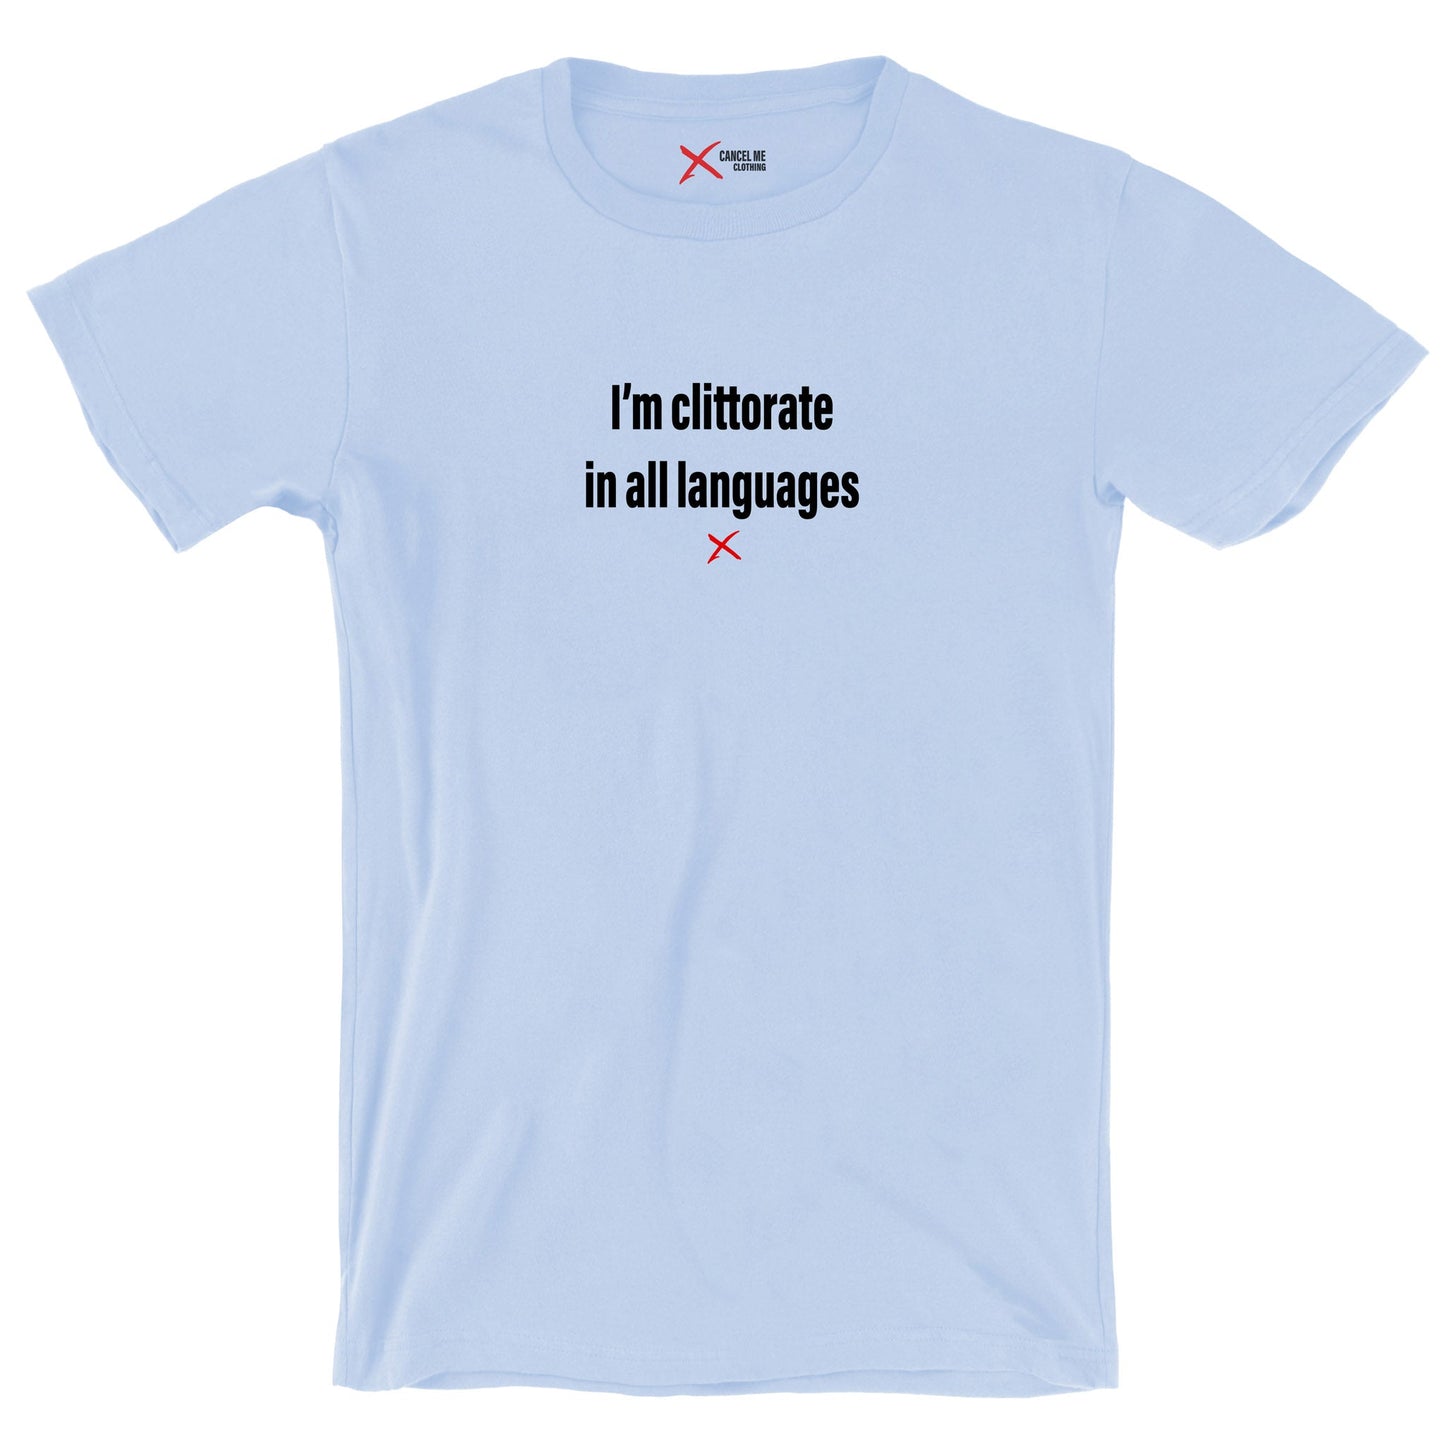 I'm clittorate in all languages - Shirt